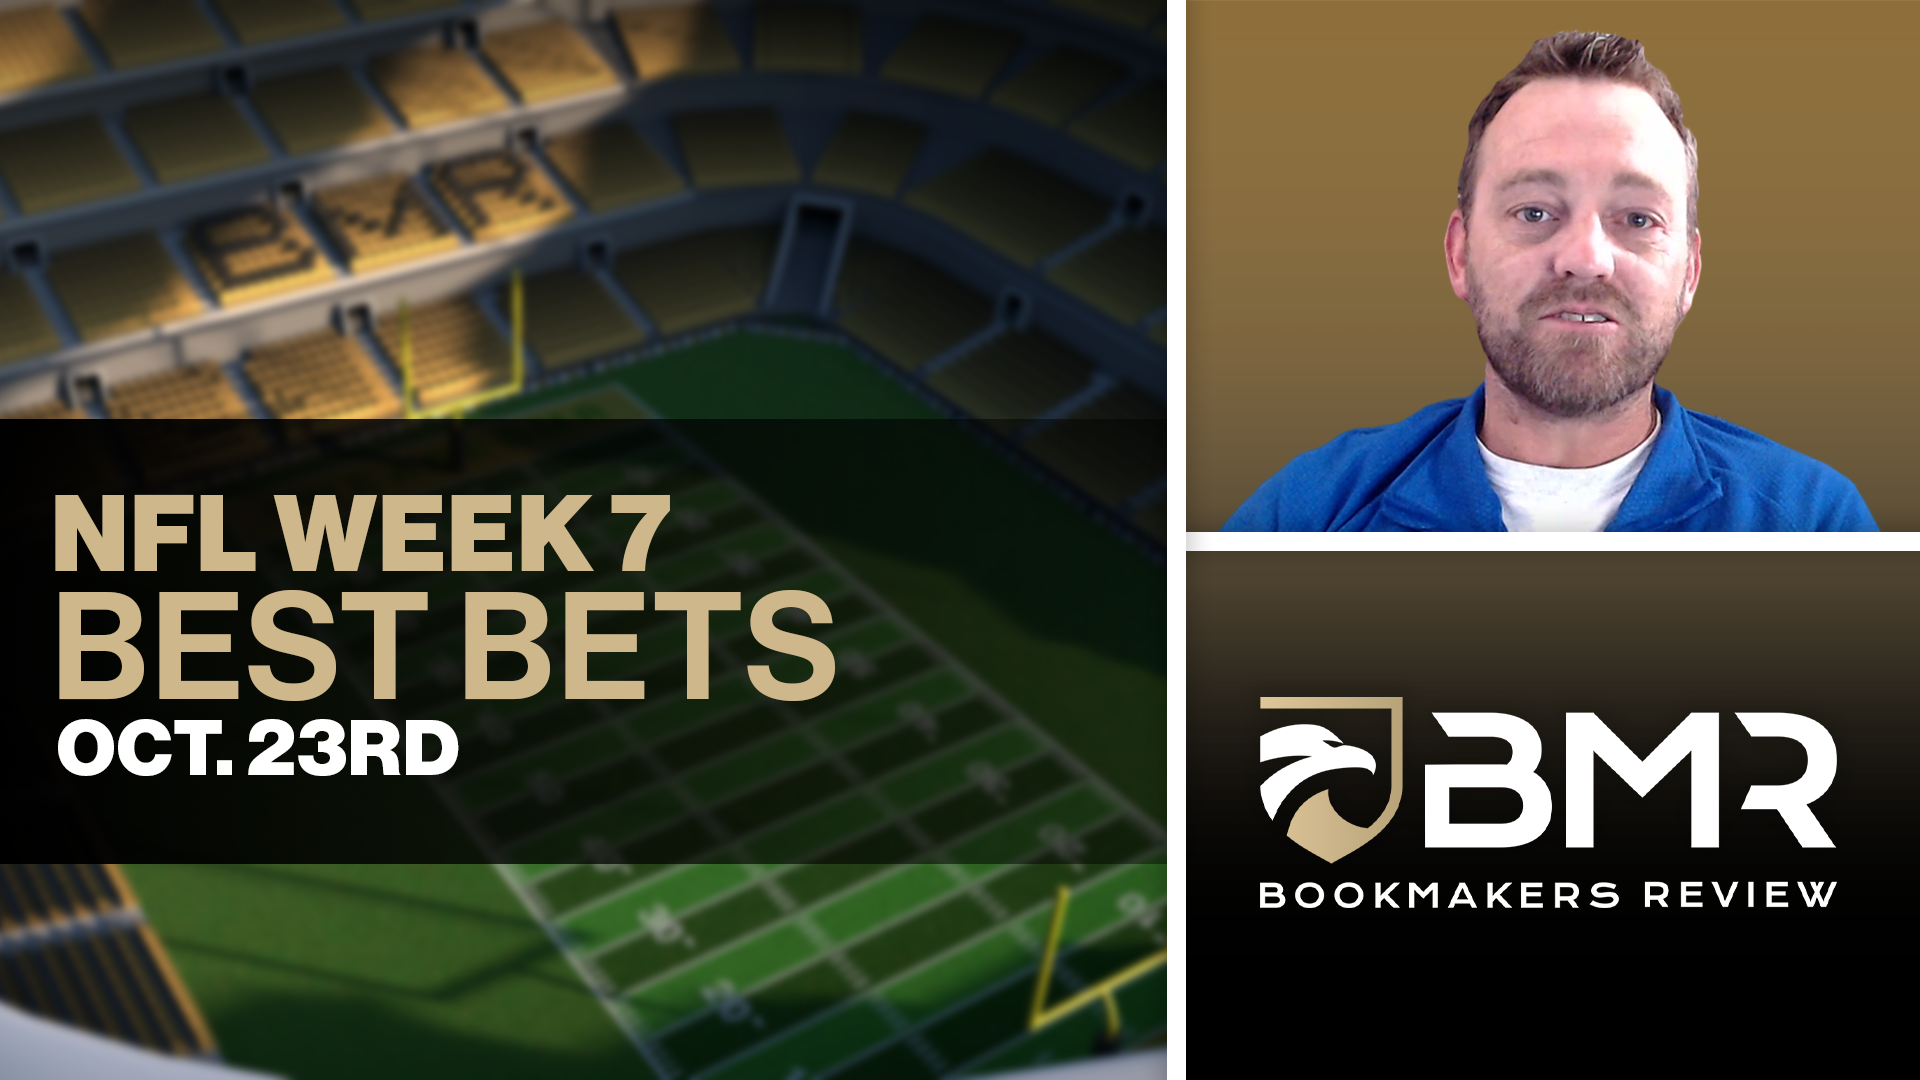 NFL Best Bets &#8211; Picks for Week 7 by Kyle Purviance (Oct. 23rd)